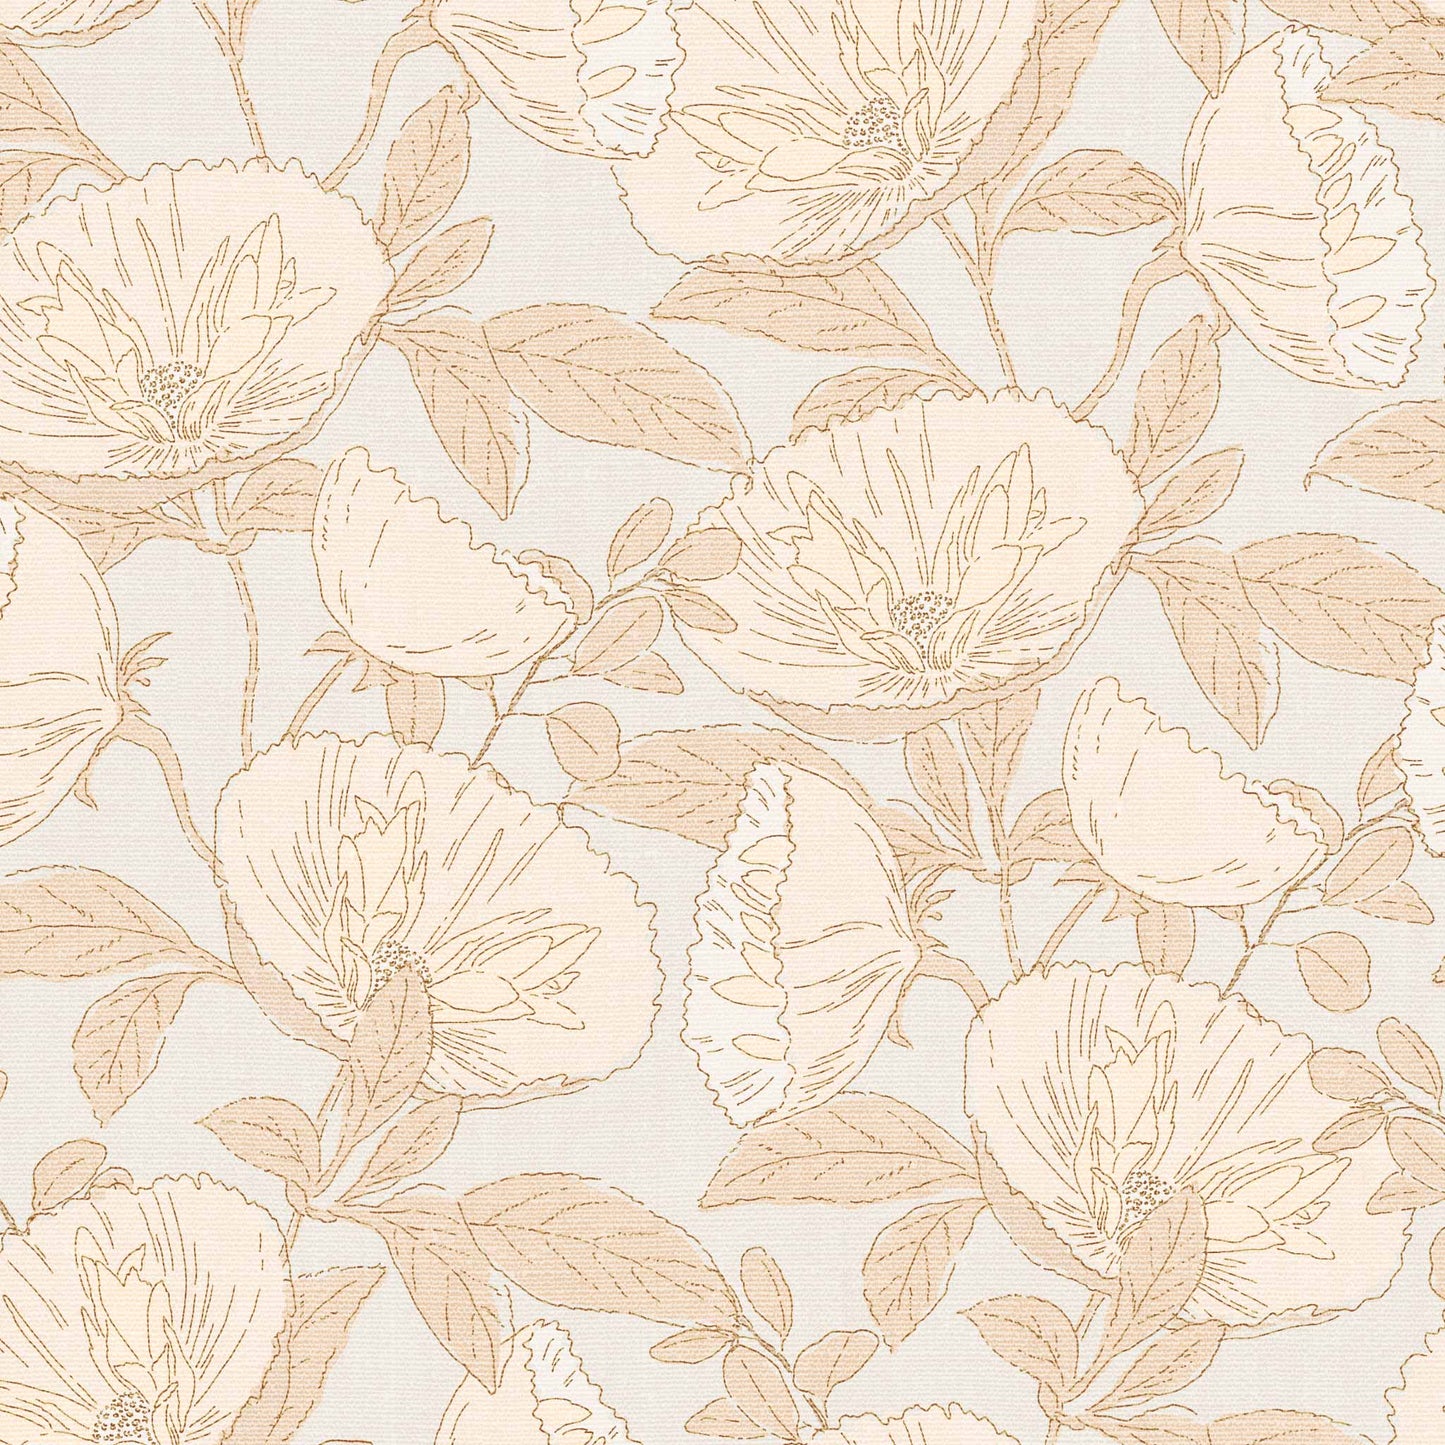 Bring the beauty of nature into your home with this stunning Spring Cosmos Wallpaper. Showcasing blooming colorful flowers, this wallpaper will make an exquisite statement in any room. Its smooth neutral background makes it an inviting and timeless addition to your home.